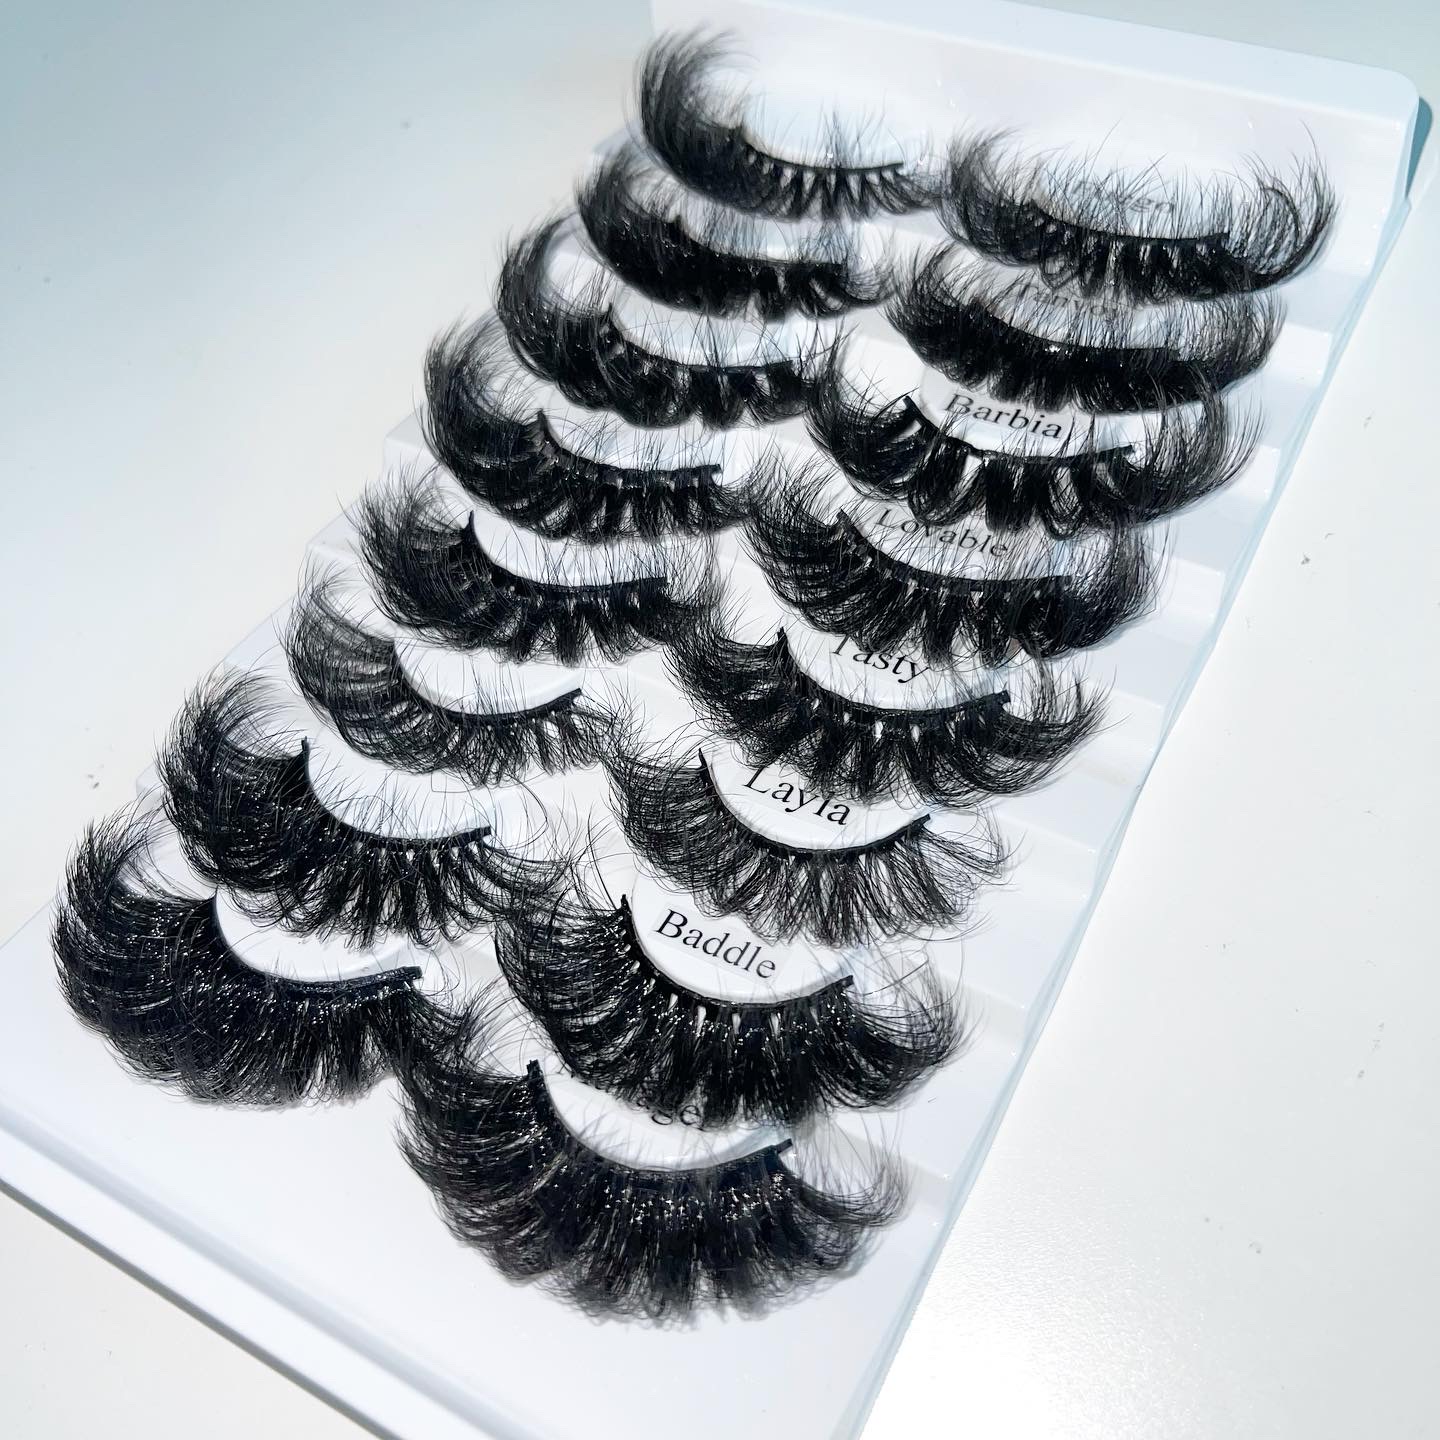 （WHOLESALE）8 PACK 25MM Russian Curl Lashes Wholesale（WHITE TRAY+CLEAR COVER:NO LOGO）(FREE DHL shipping)